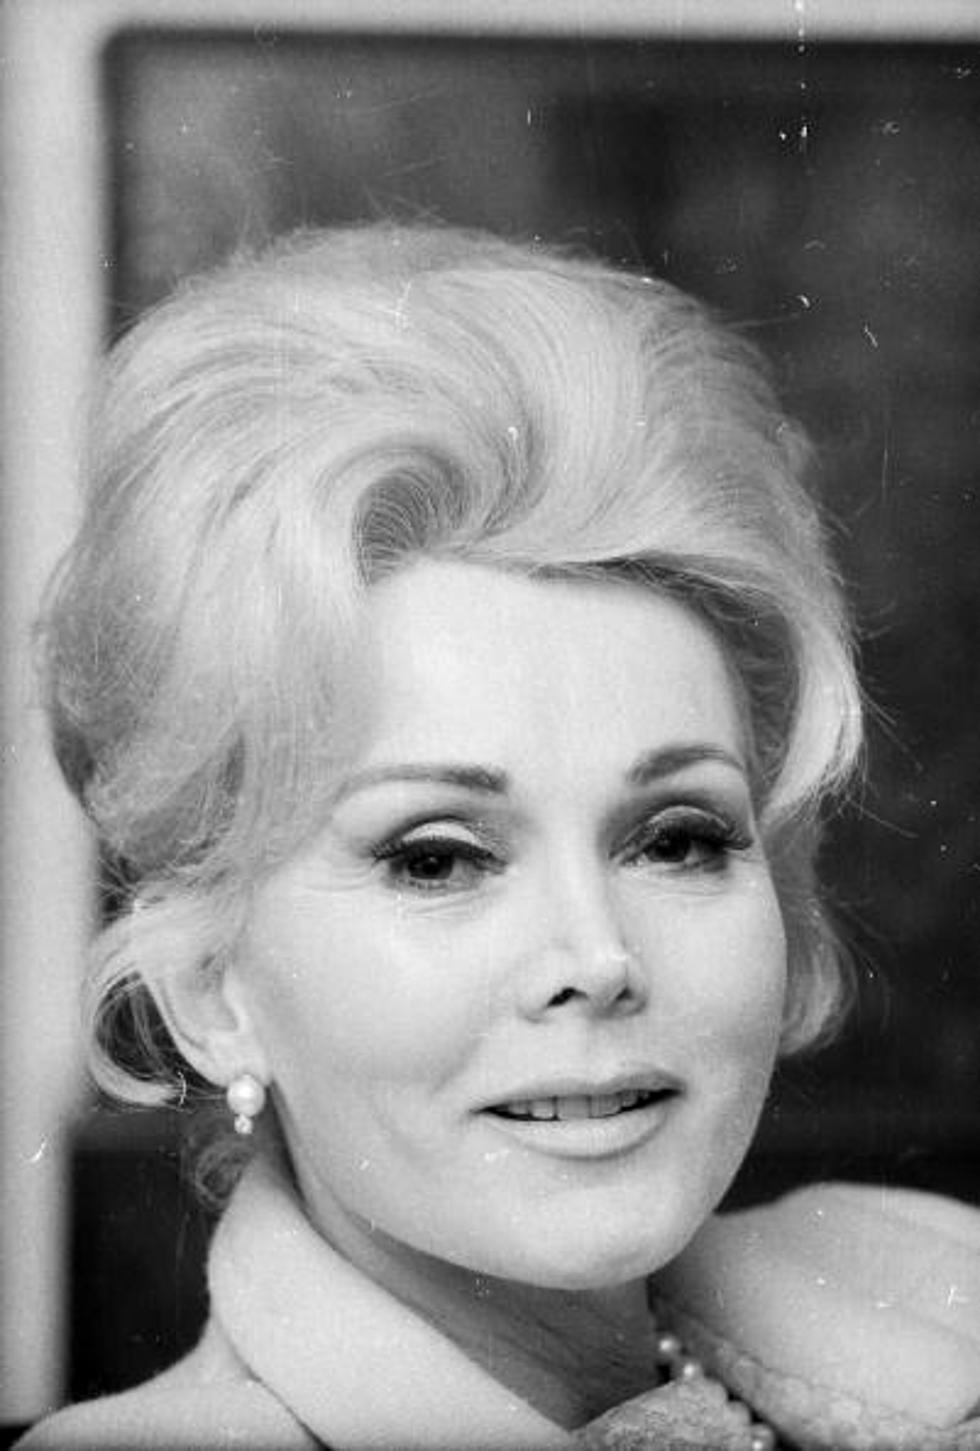 Zsa Zsa Gabor’s Bel Air Mansion For Sale